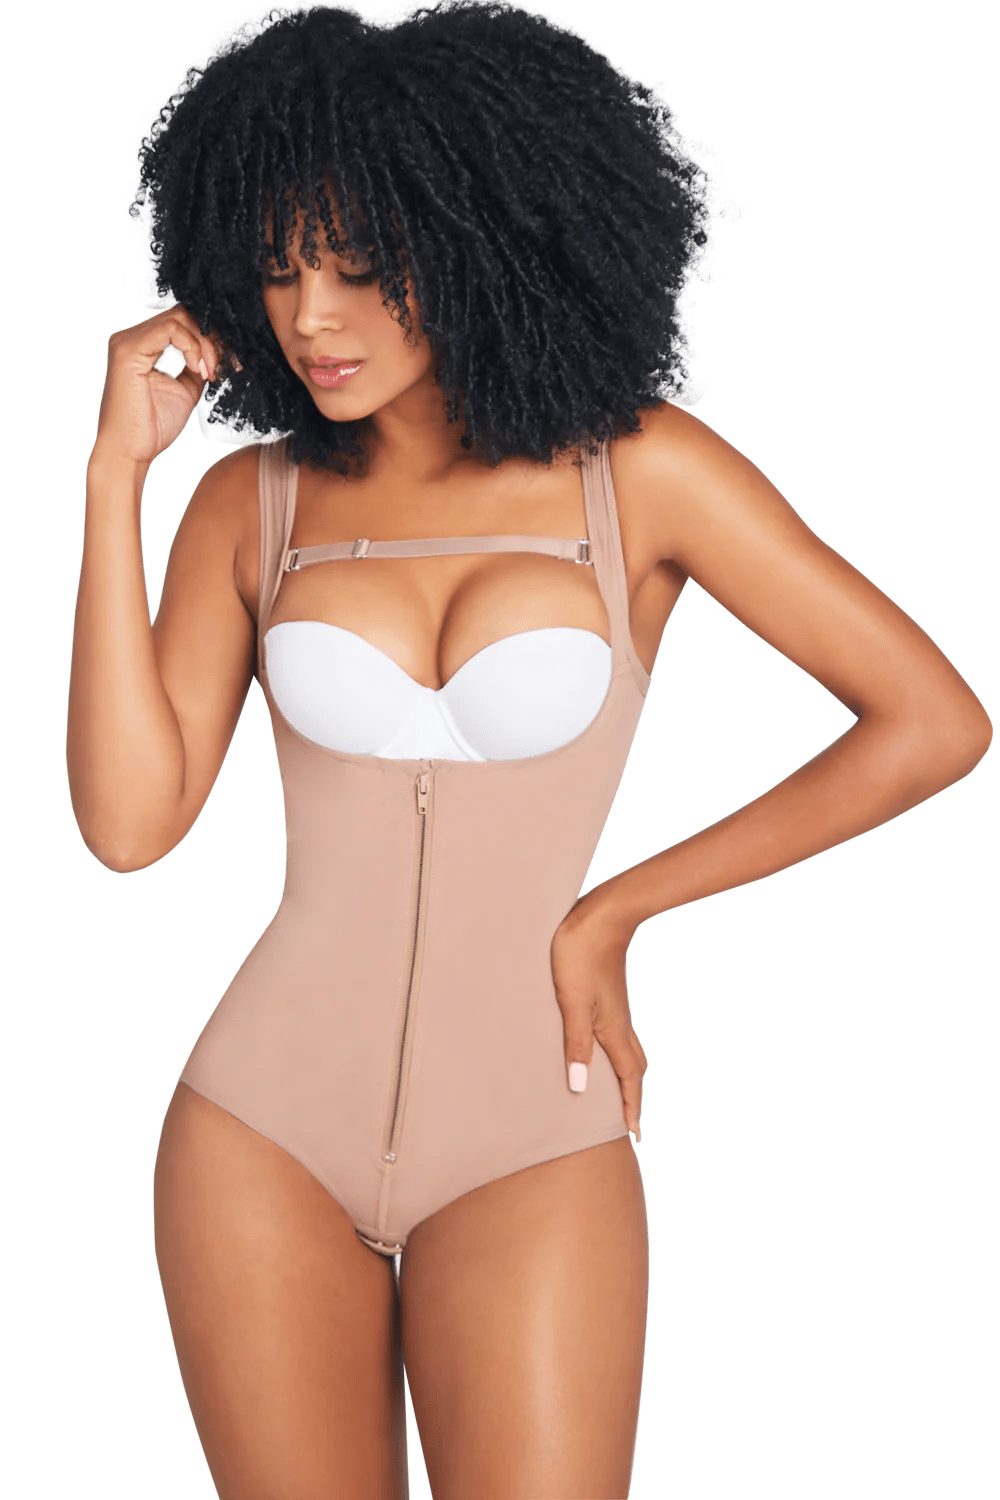 Ily Clothing Shapwear Wide Strapped Full Bodyshaper